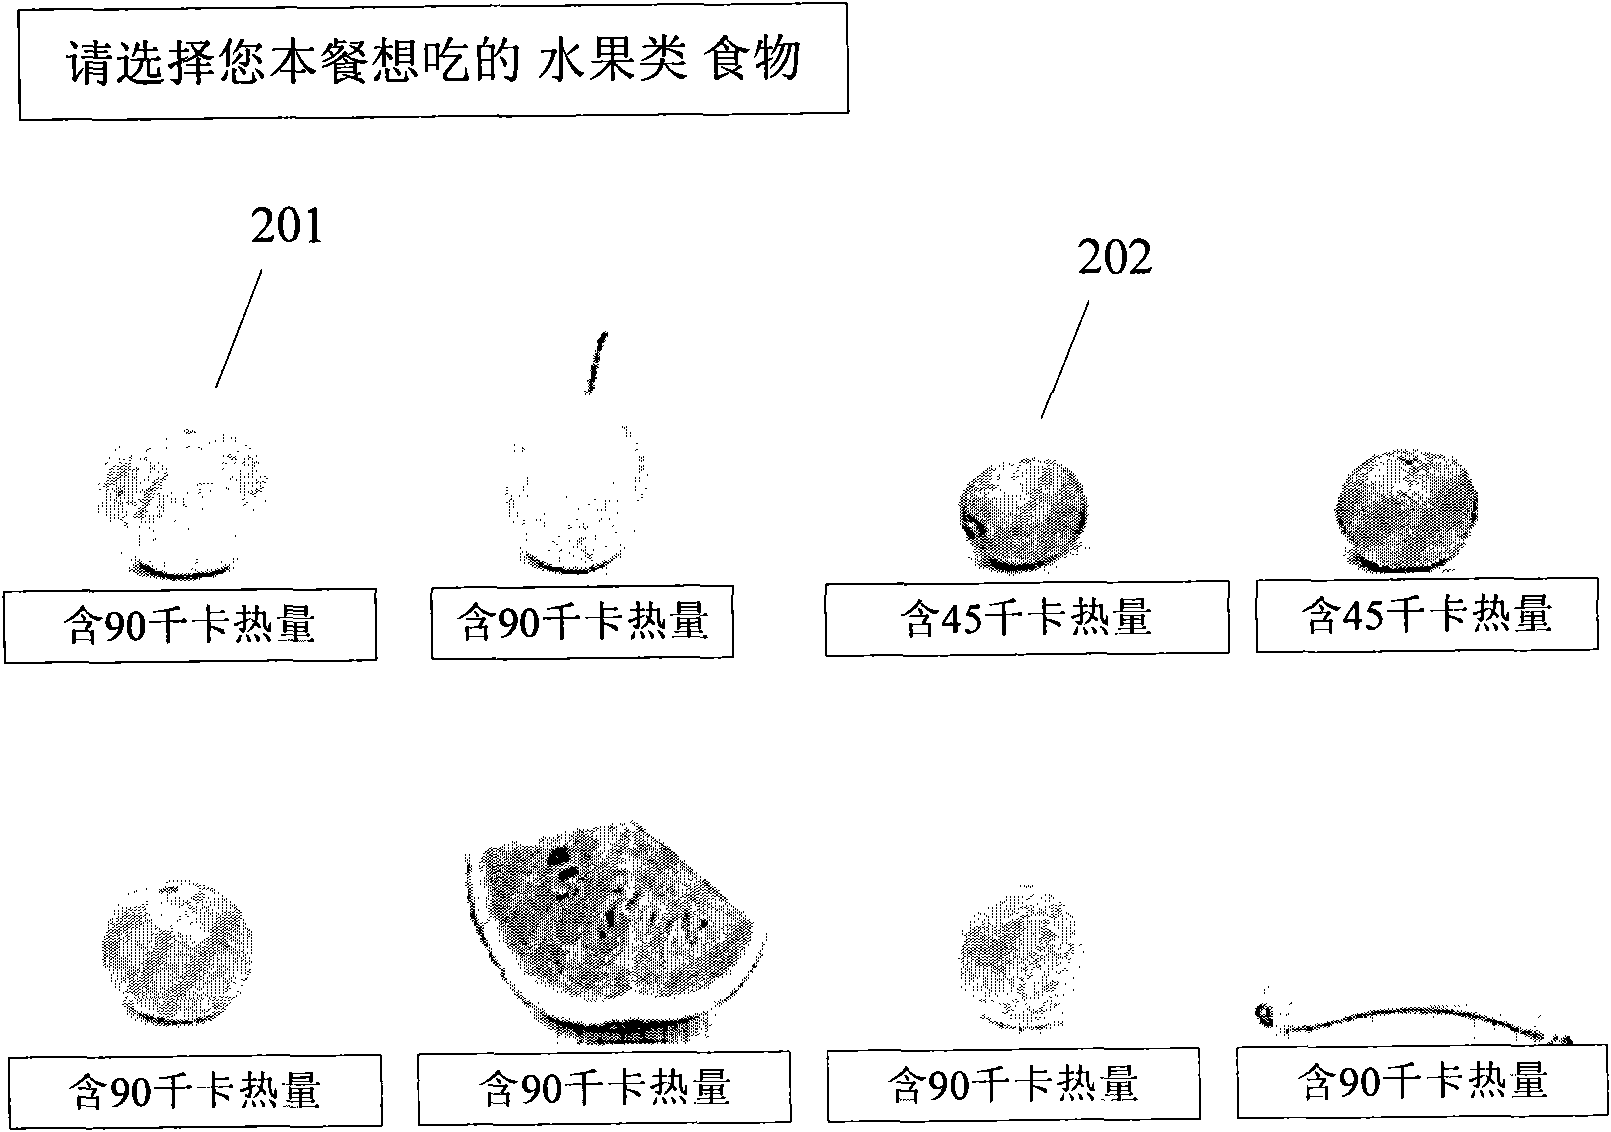 Information processing device, method, corresponding equipment and reagent carrier